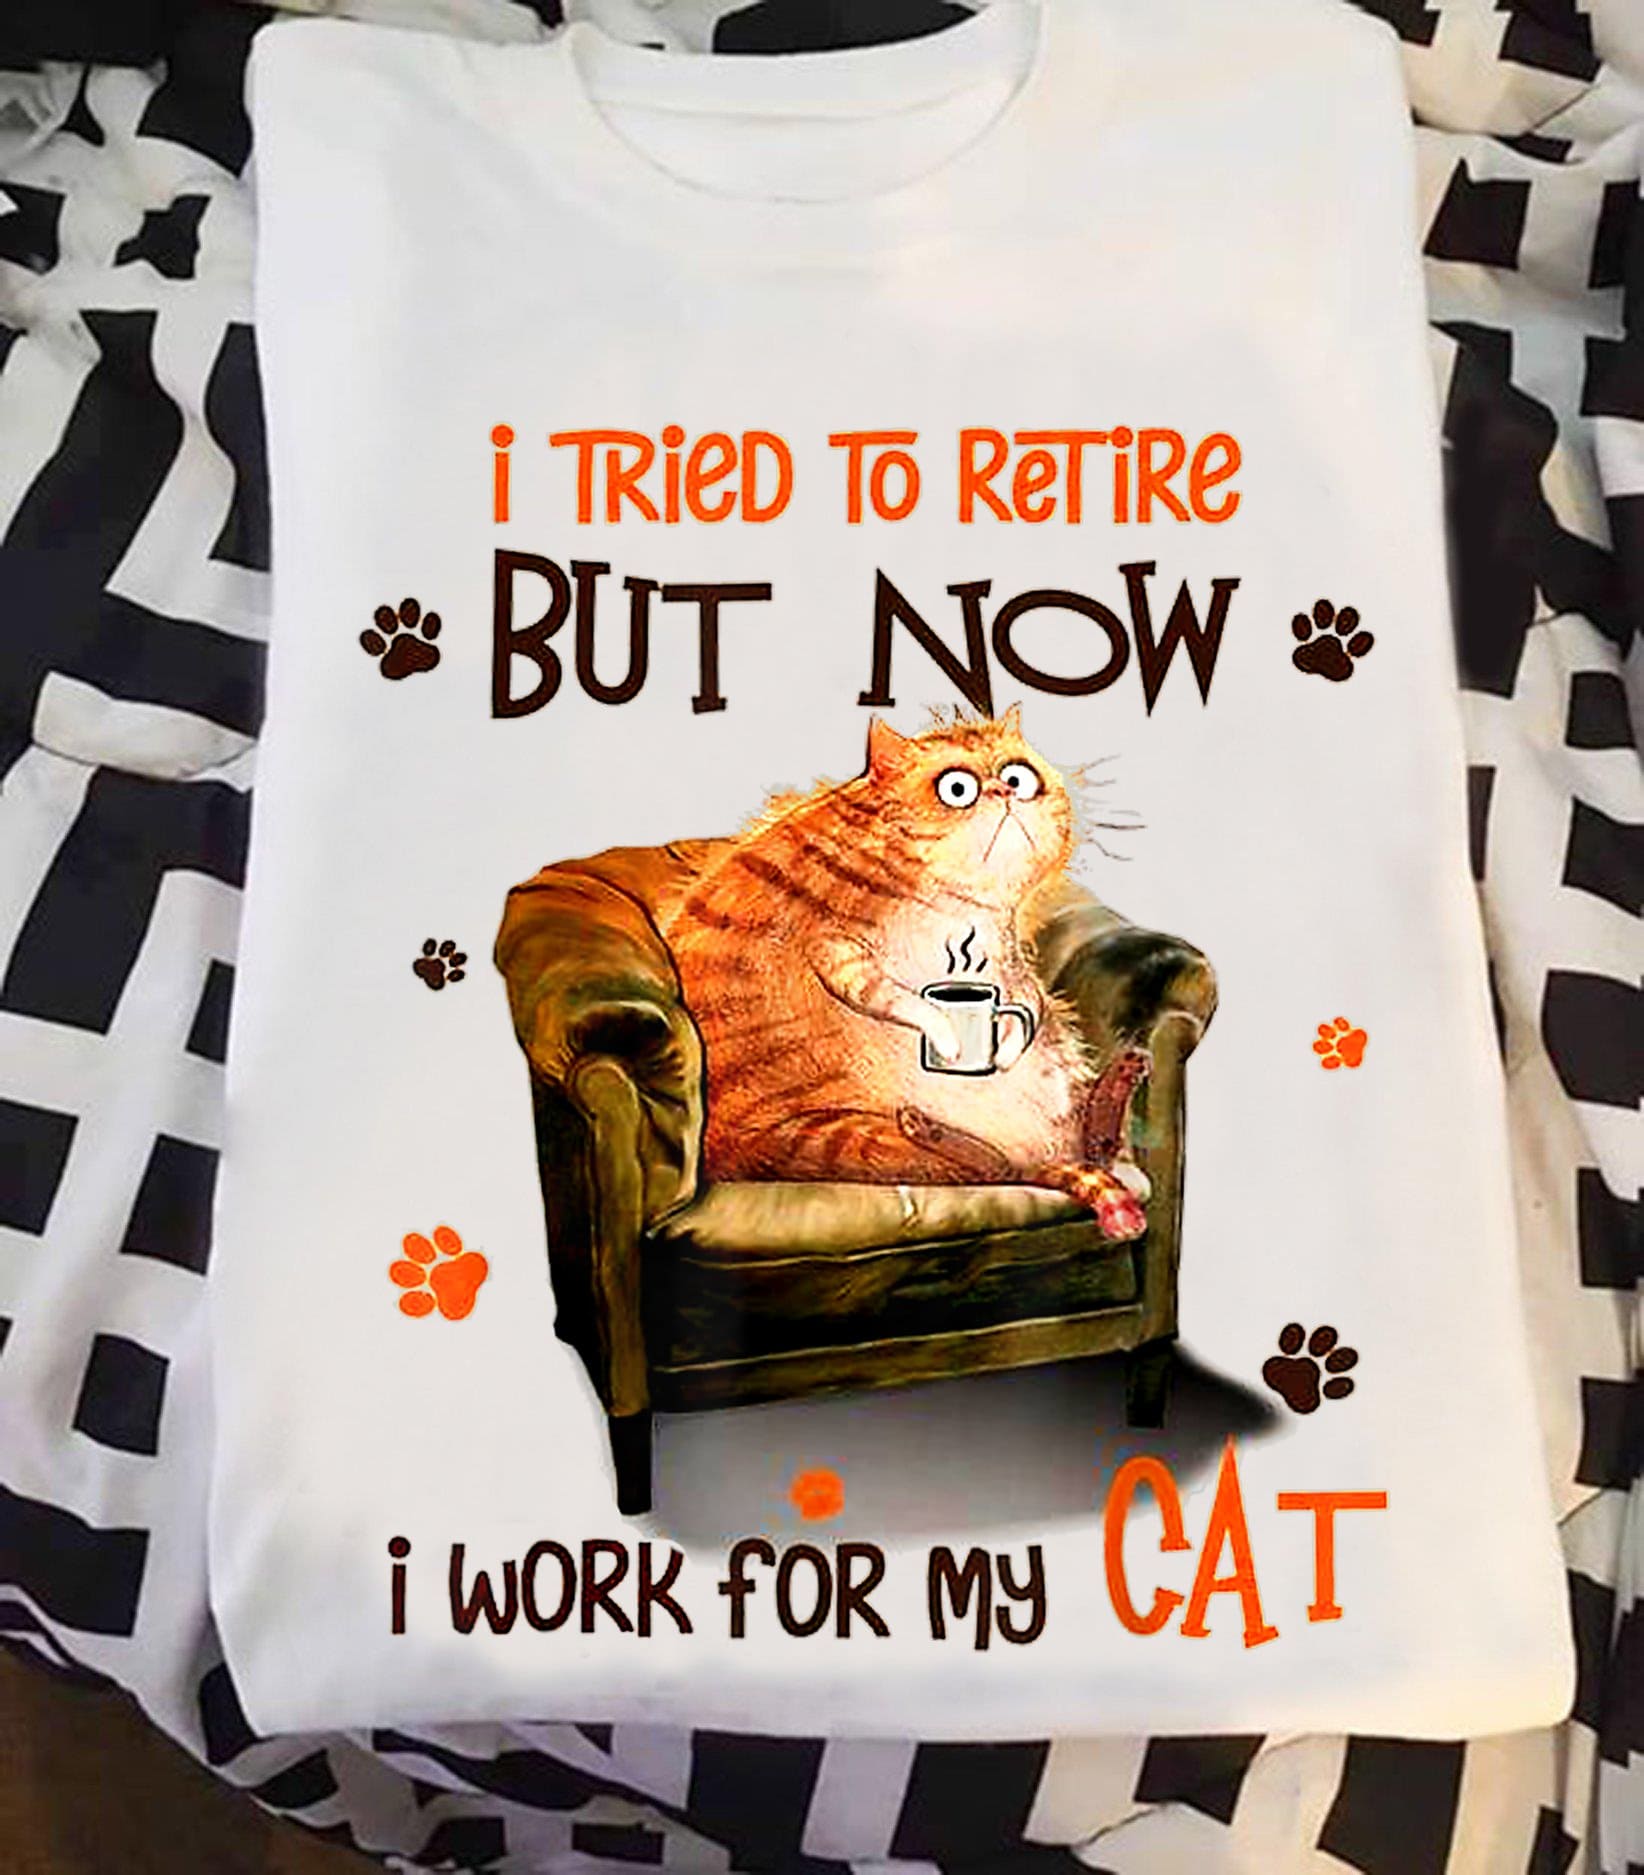 I tried to retire but now I work for my cat - Gift for cat person, fat cat drinking coffee